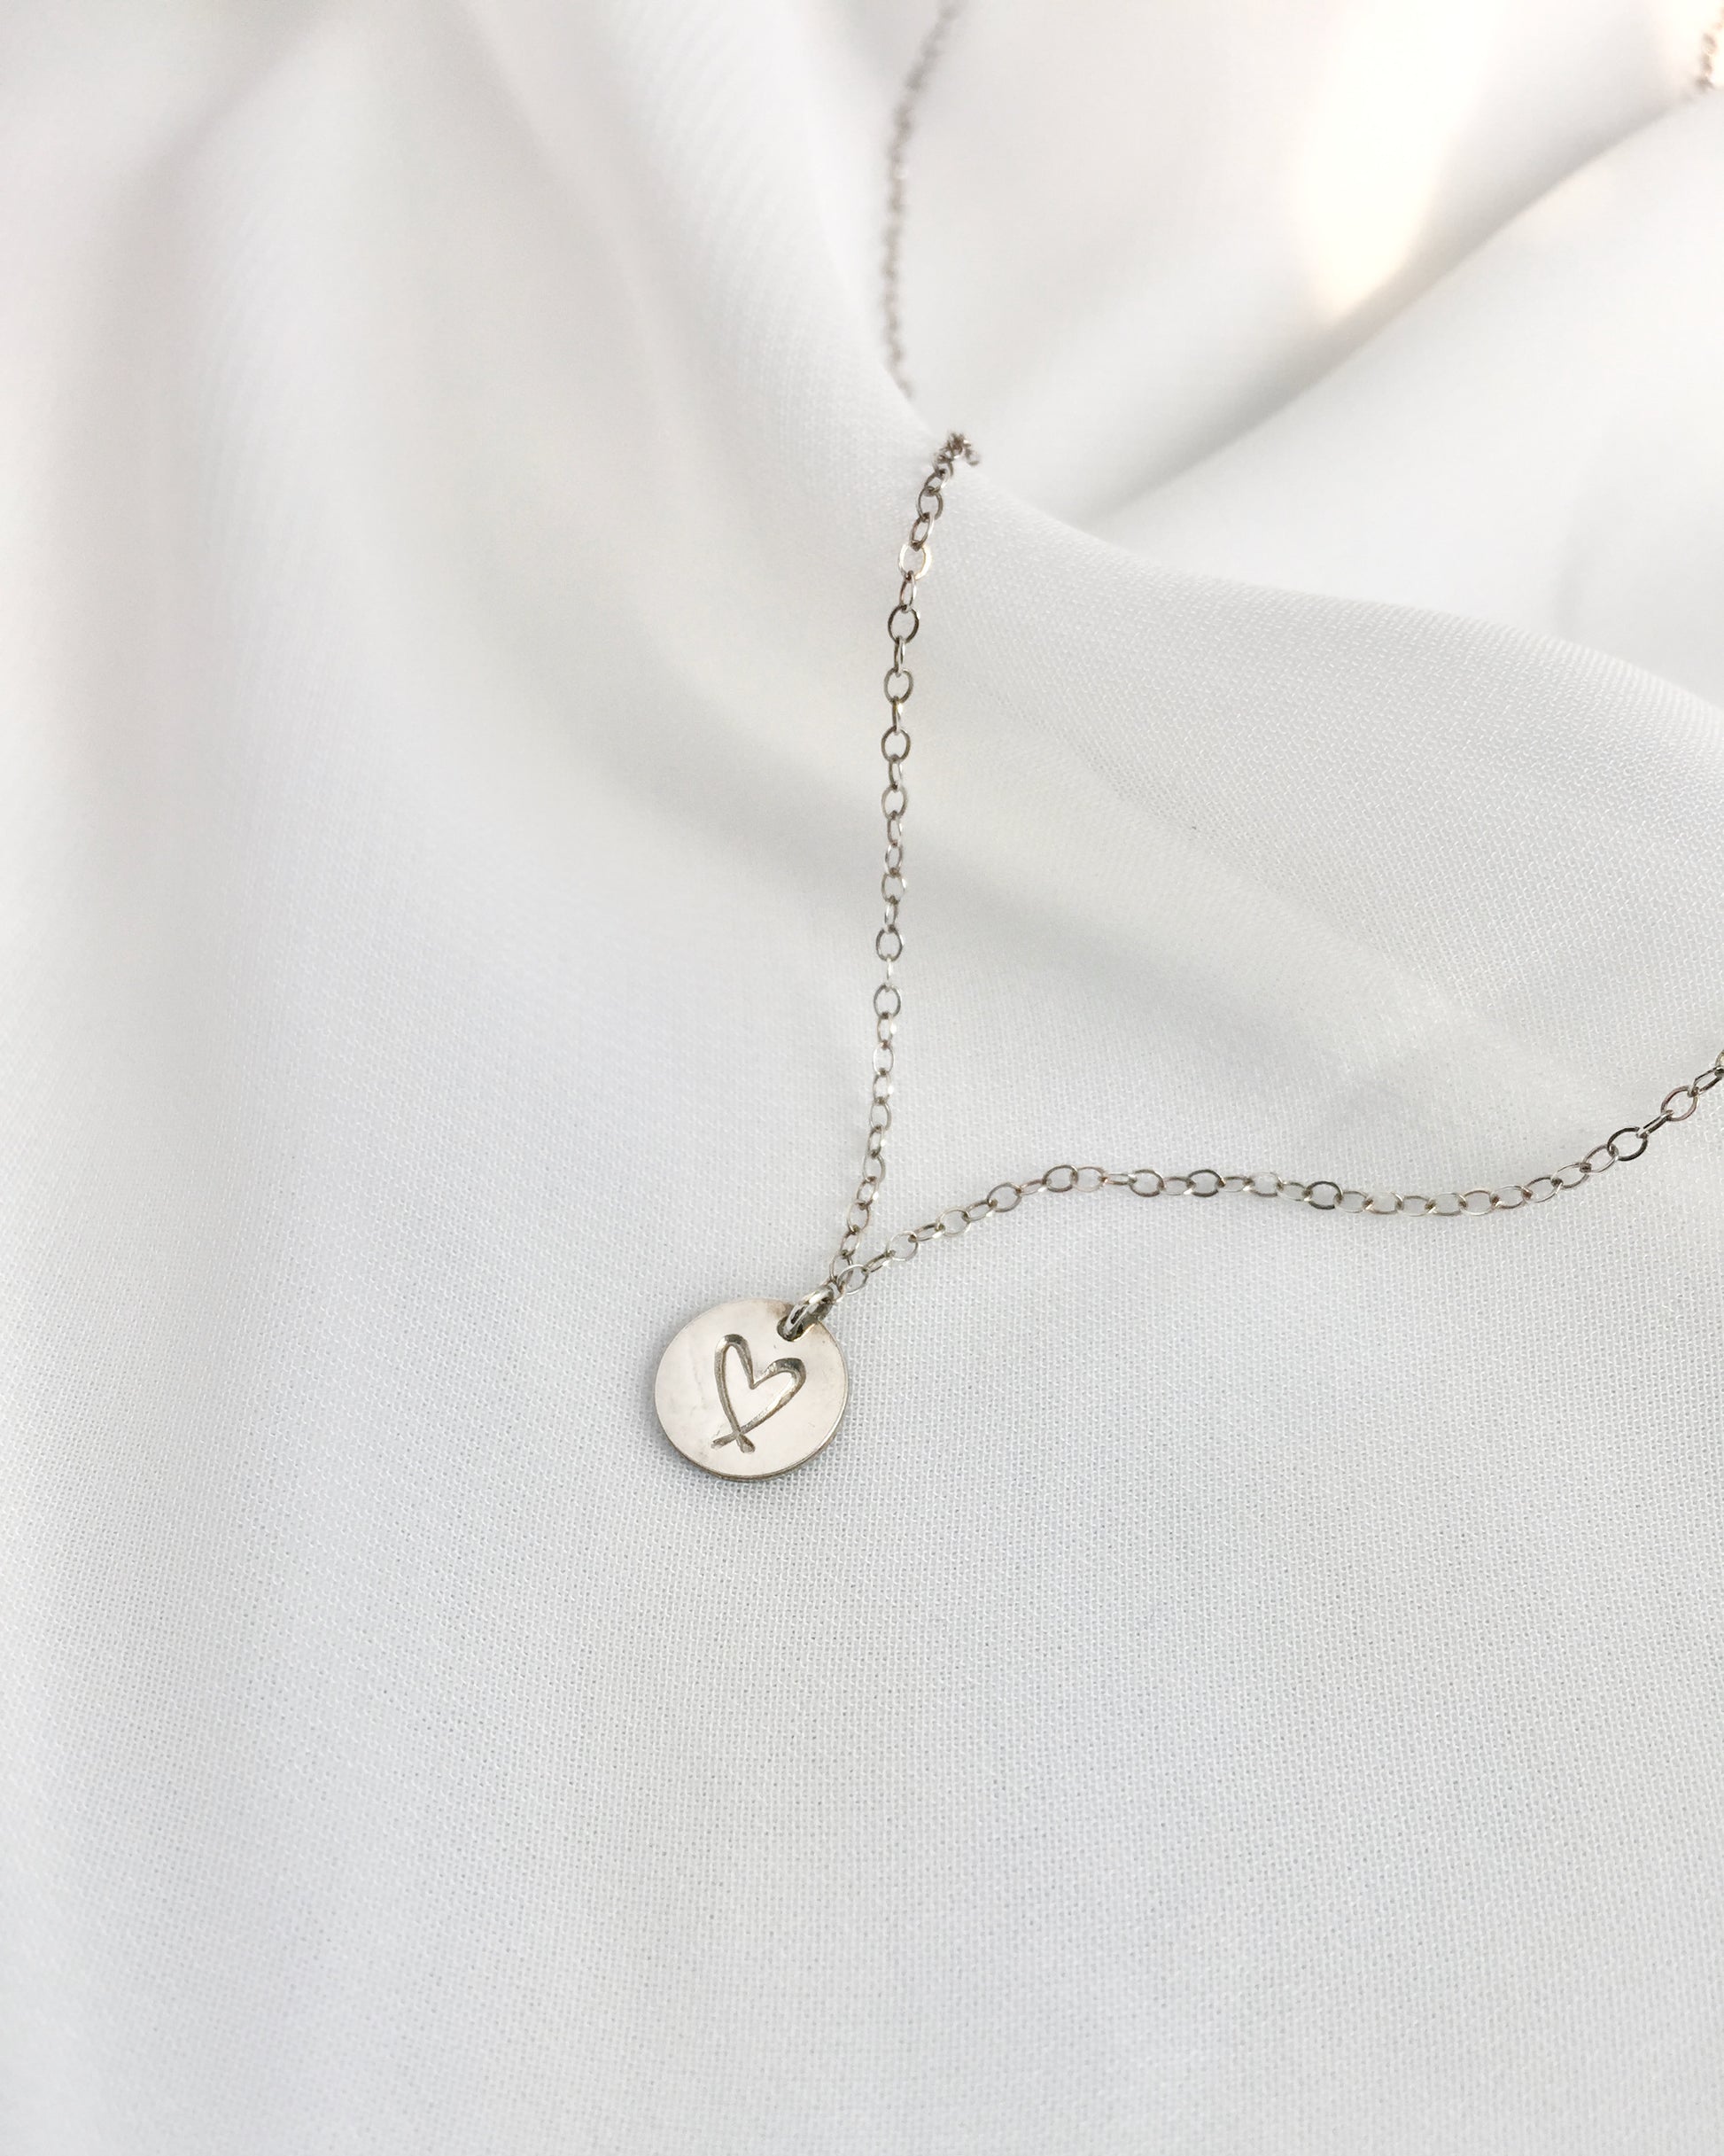 Meaningful Necklace For Mom in Sterling Silver or Gold Filled | Mom Dainty Gift Heart Necklace | IB Jewelry